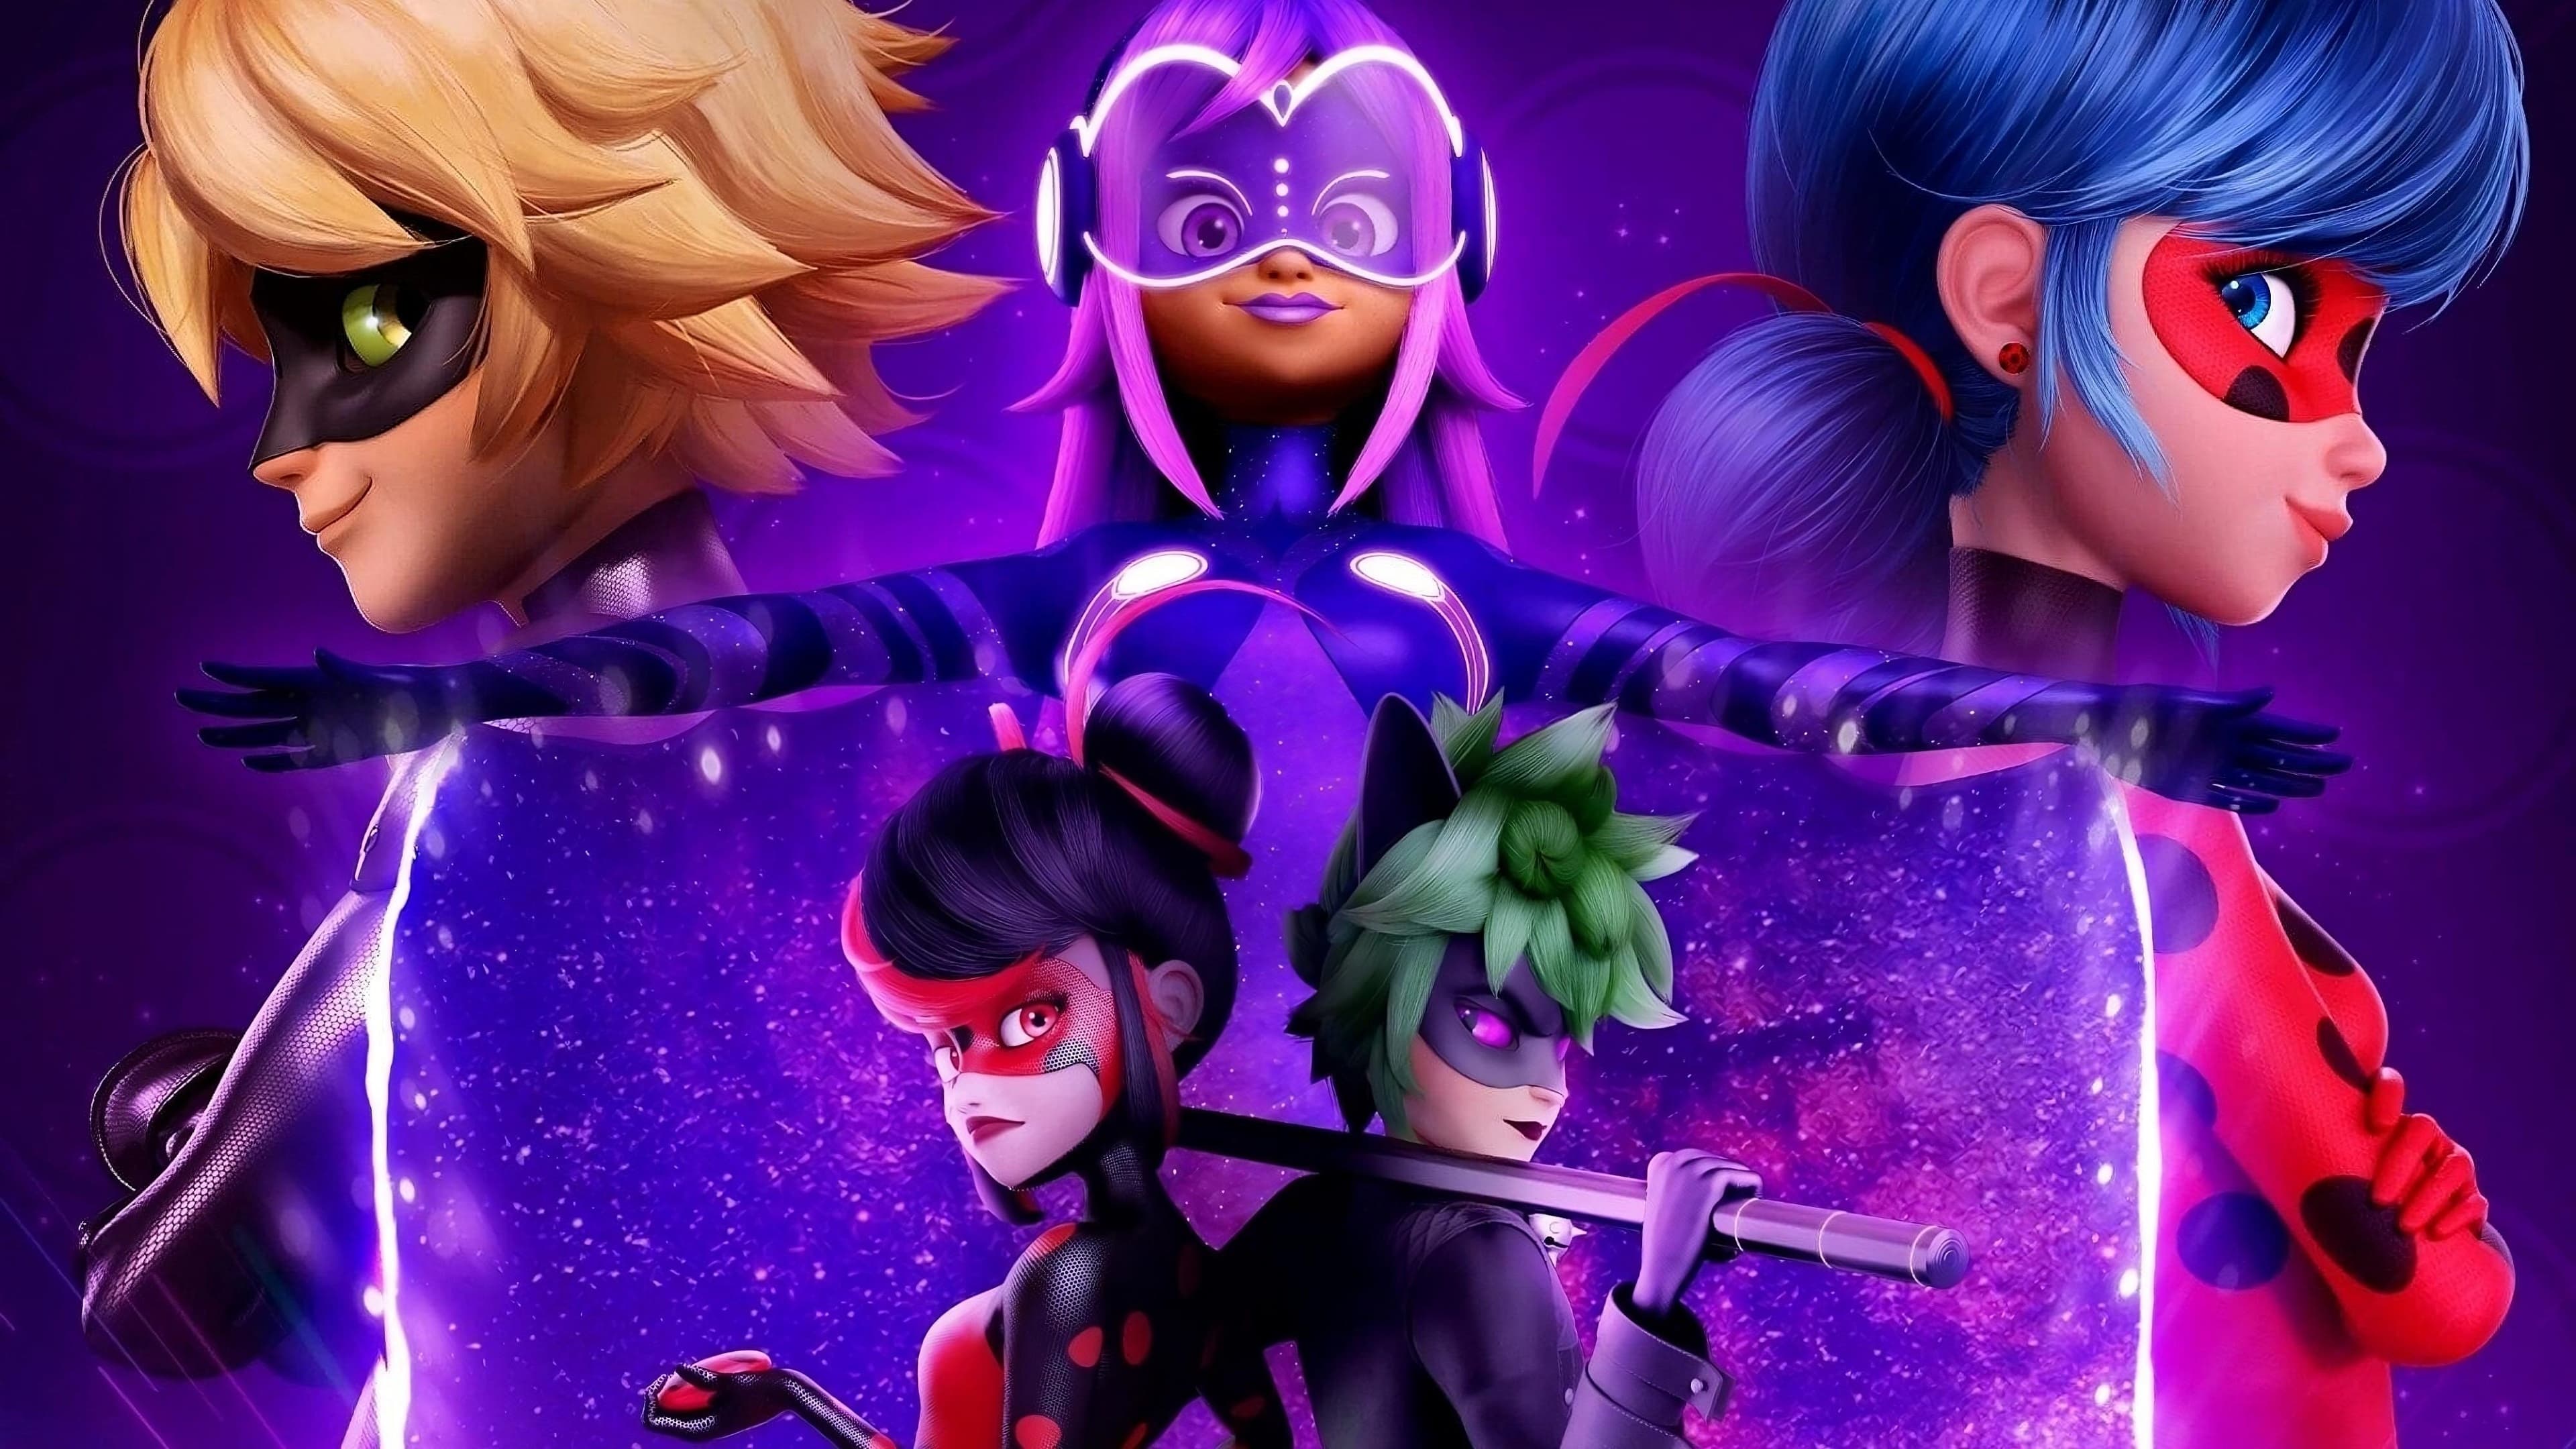 Miraculous World: Paris, Tales of Shadybug and Claw Noir (2023) - Posters —  The Movie Database (TMDB)